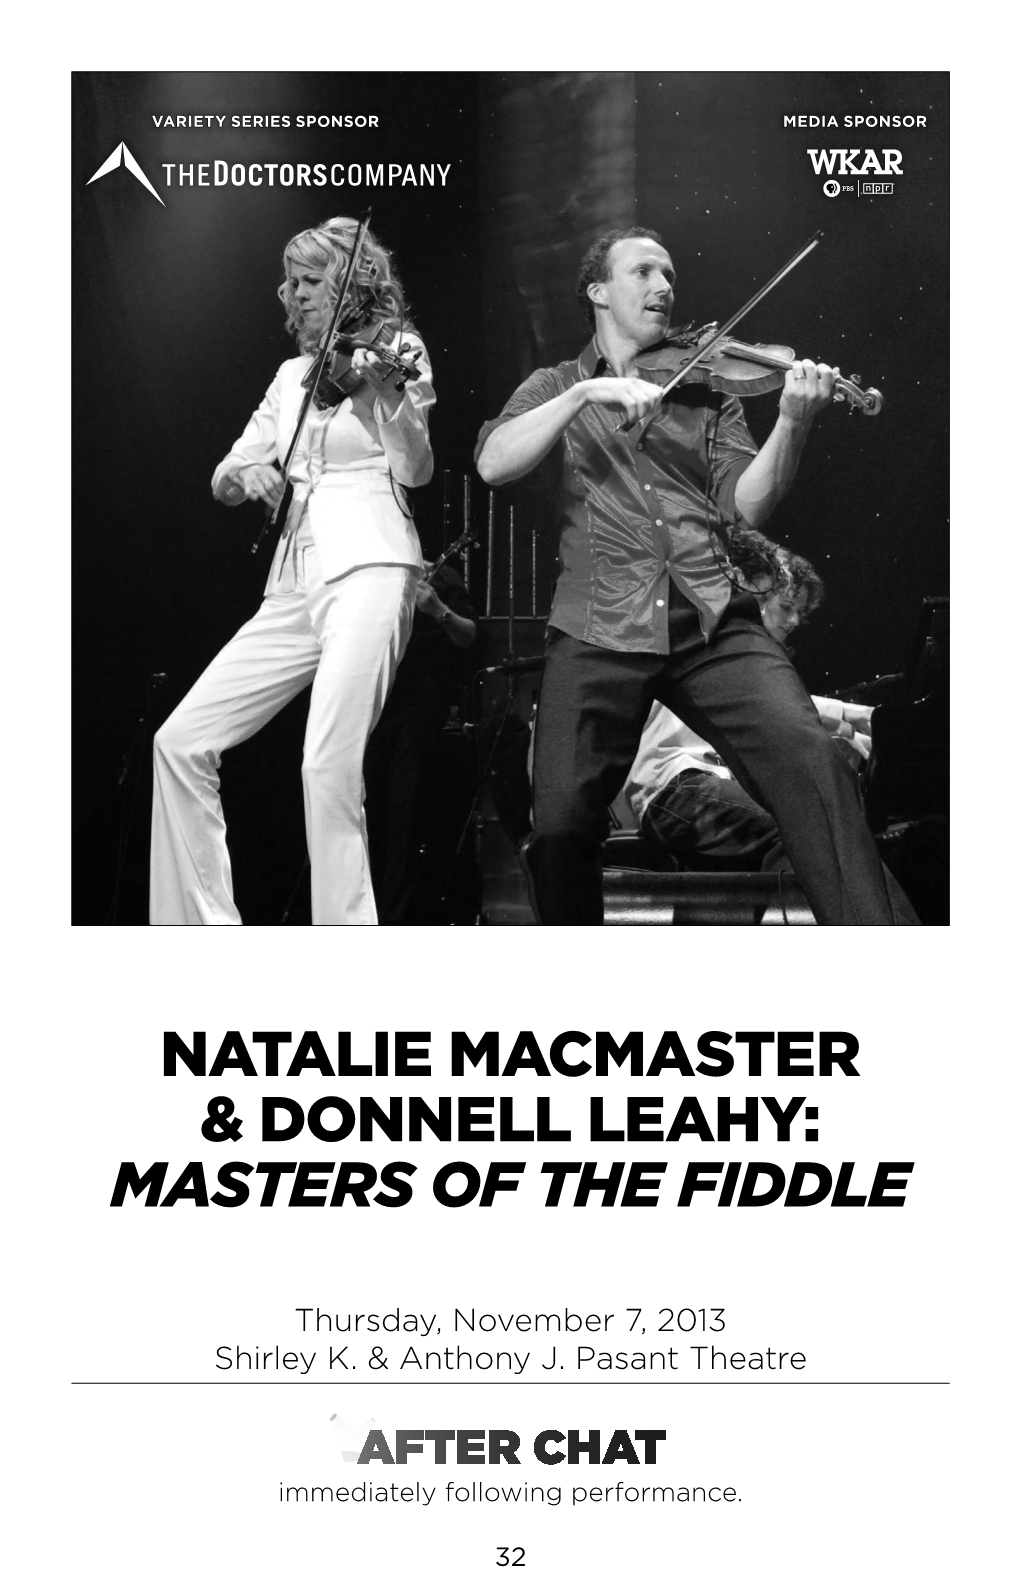 Natalie Macmaster & Donnell Leahy